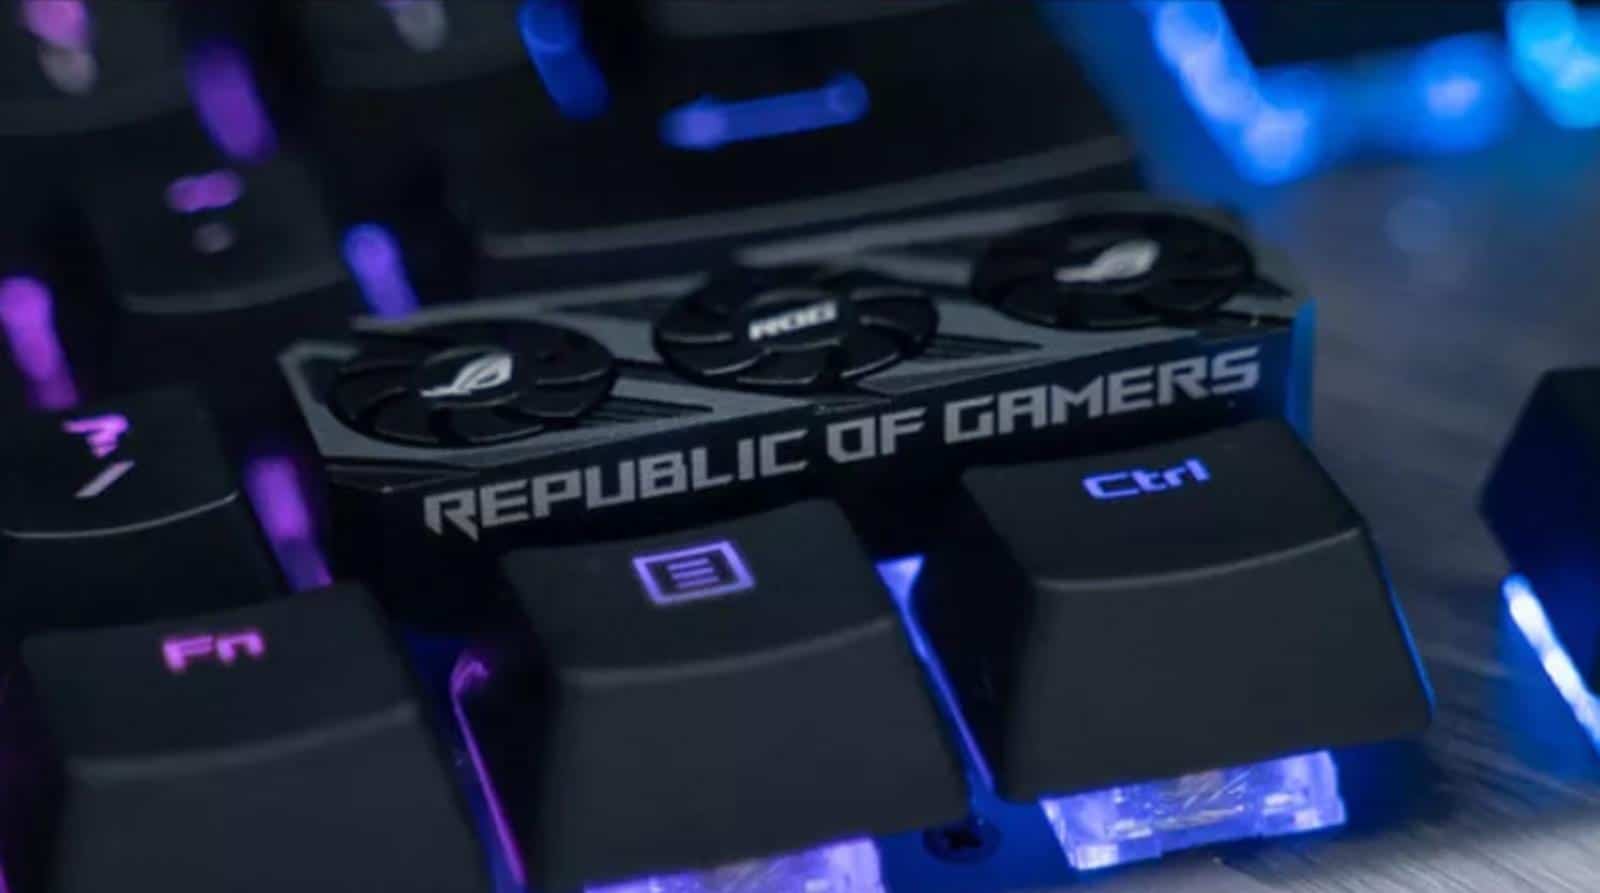 Unique ASUS keycap, i.e. a graphics card for the keyboard